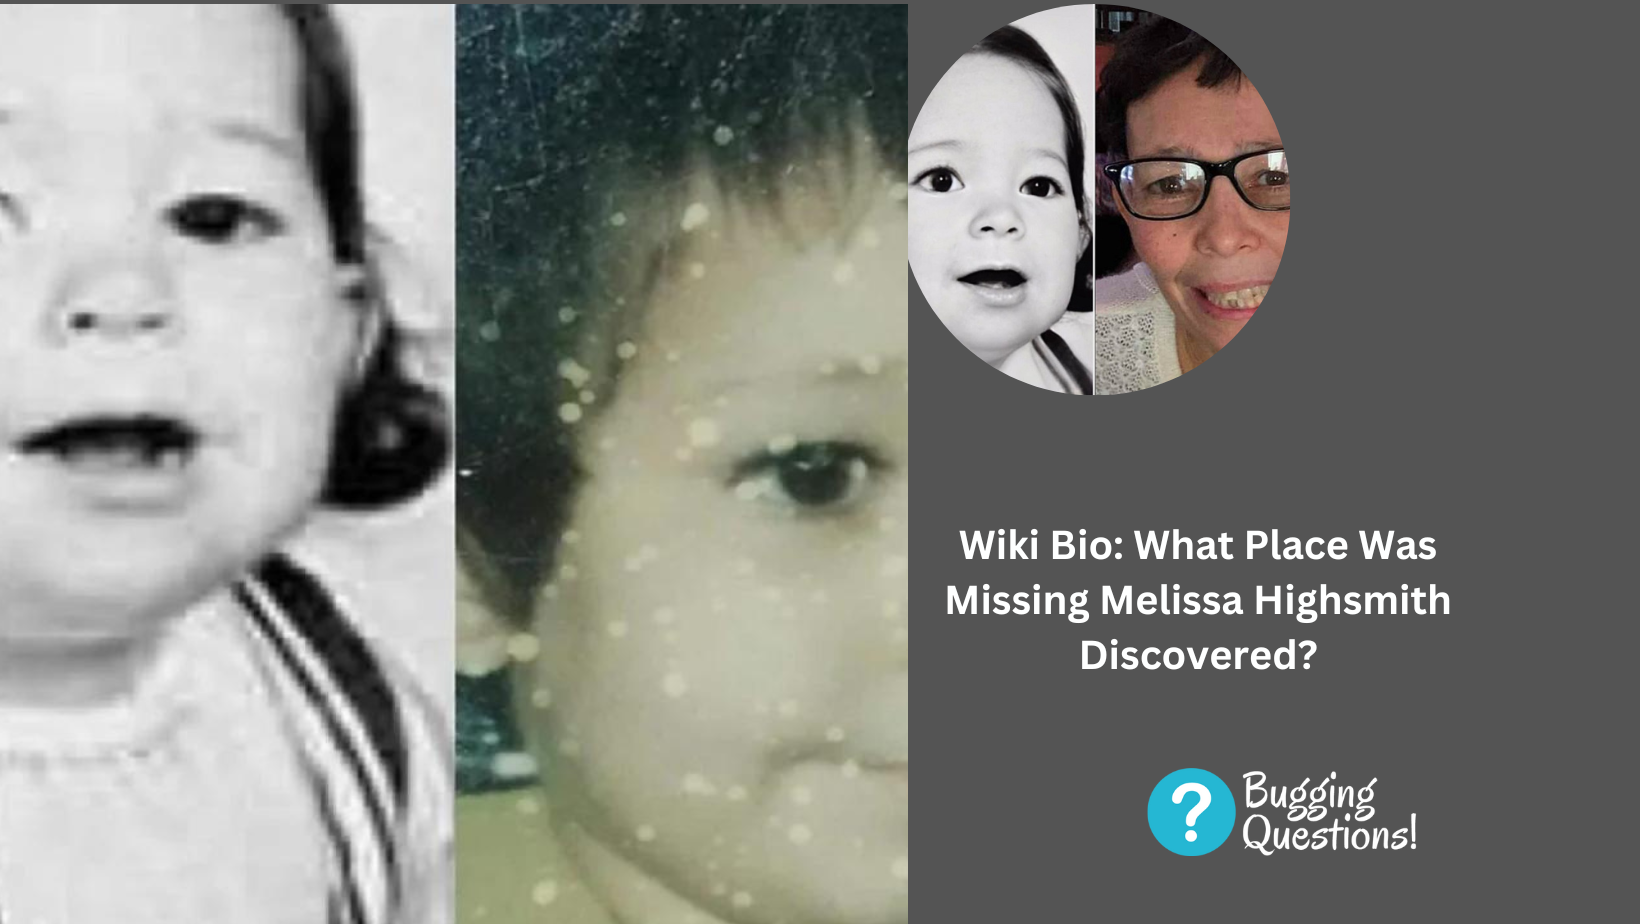 Wiki Bio: What Place Was Missing Melissa Highsmith Discovered?